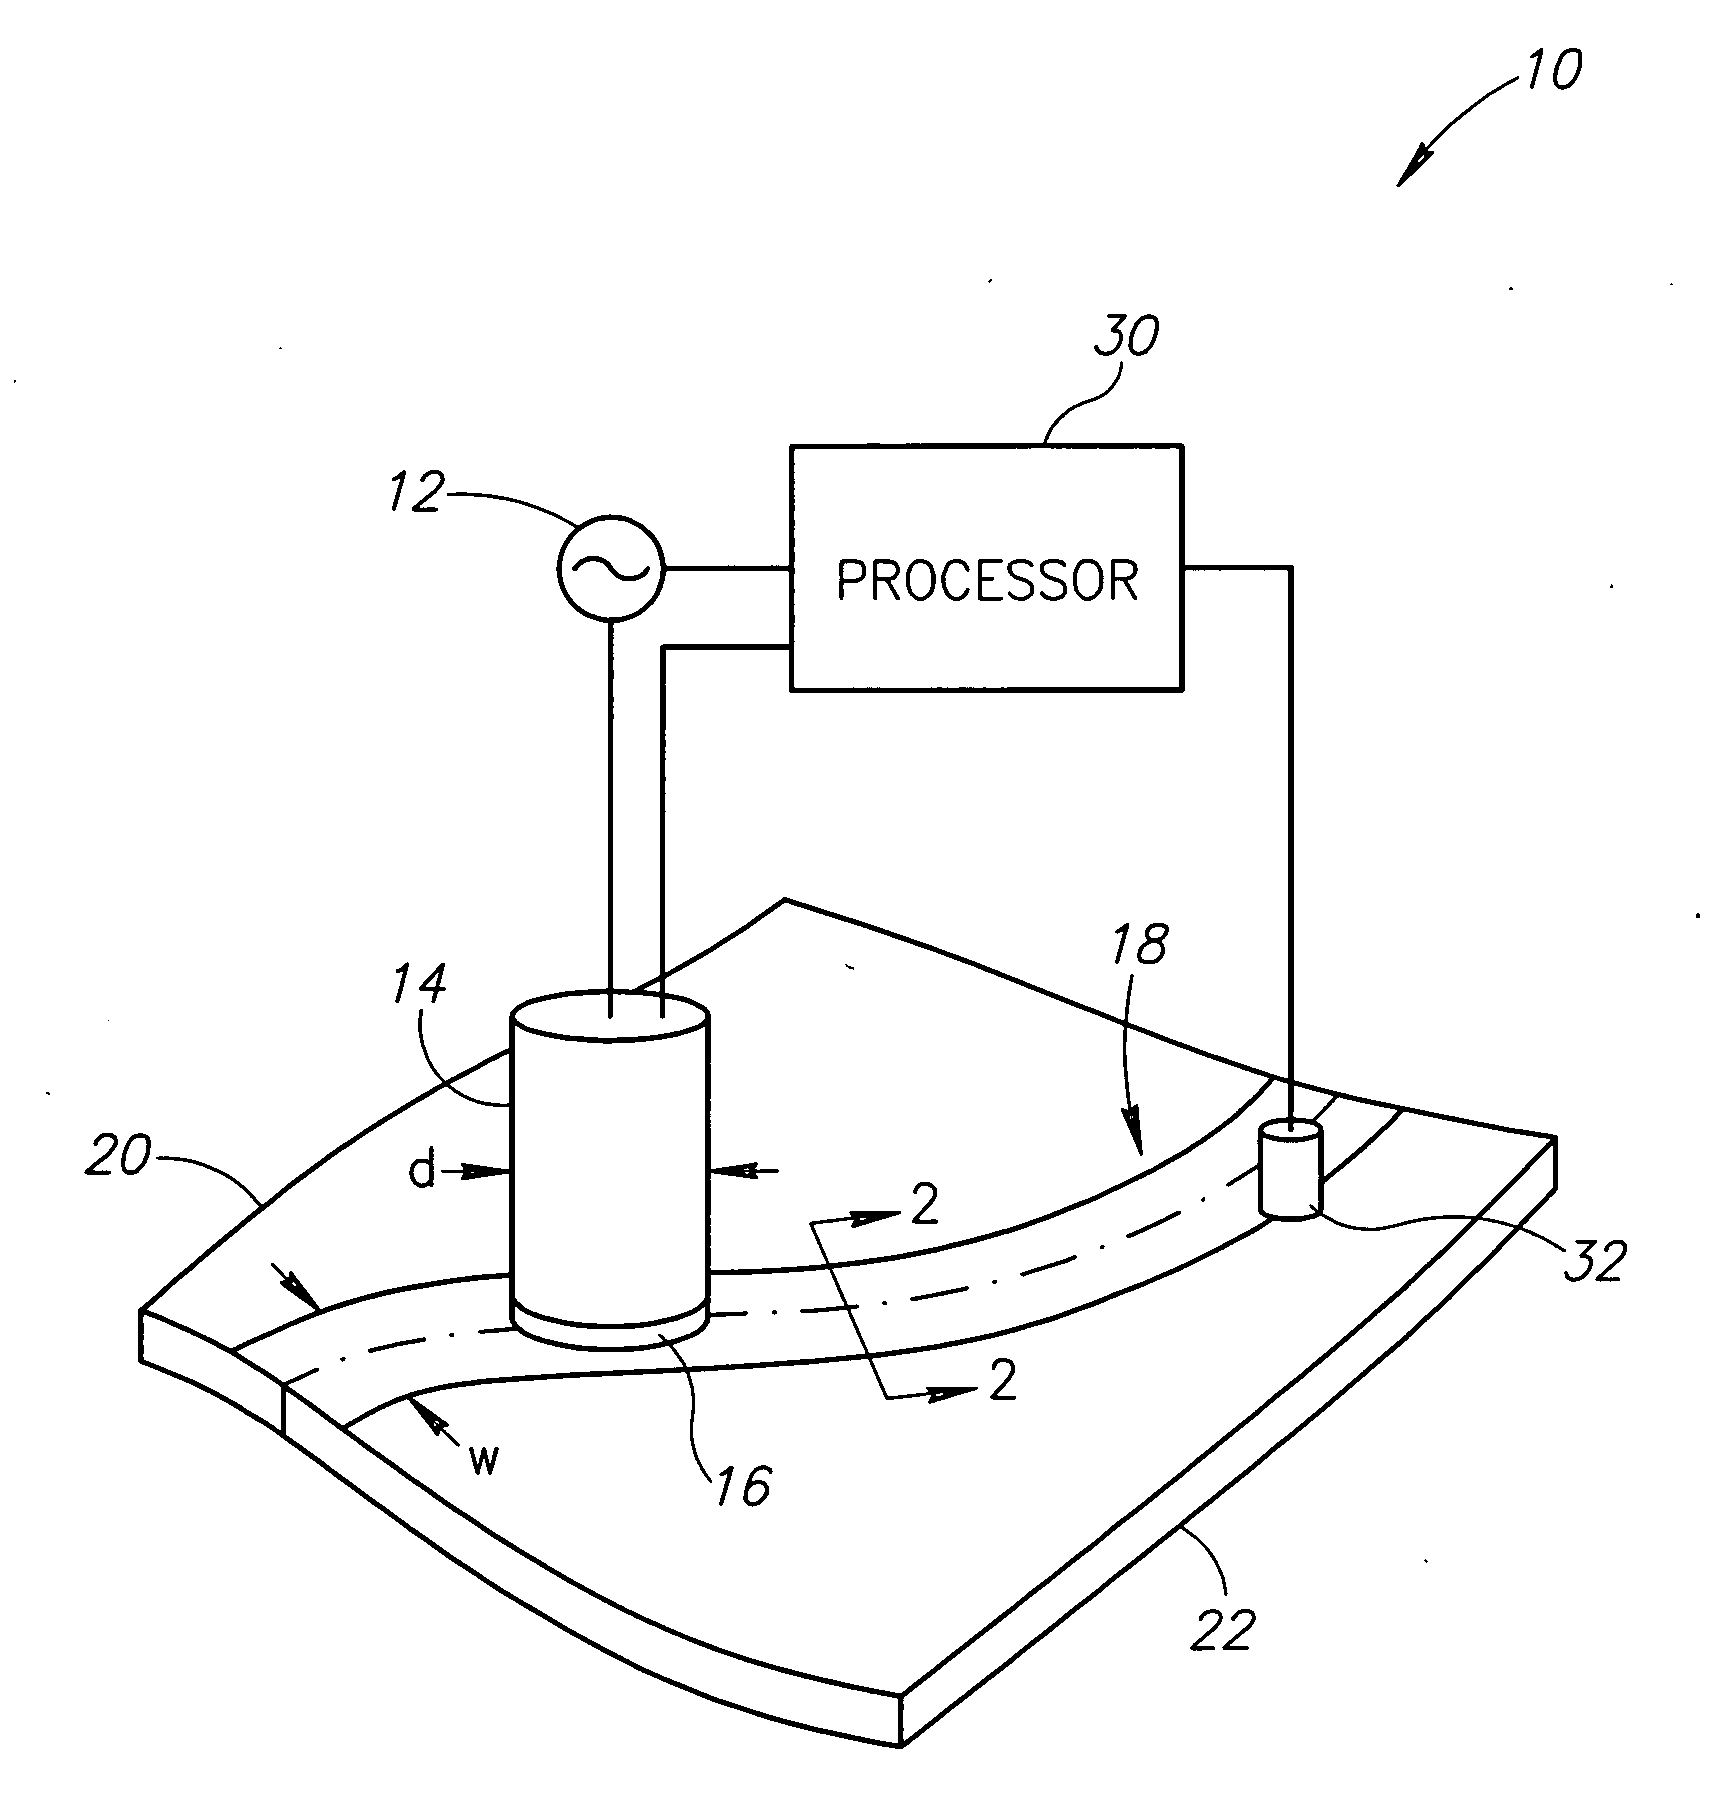 Systems and methods for inspecting electrical conductivity in composite materials